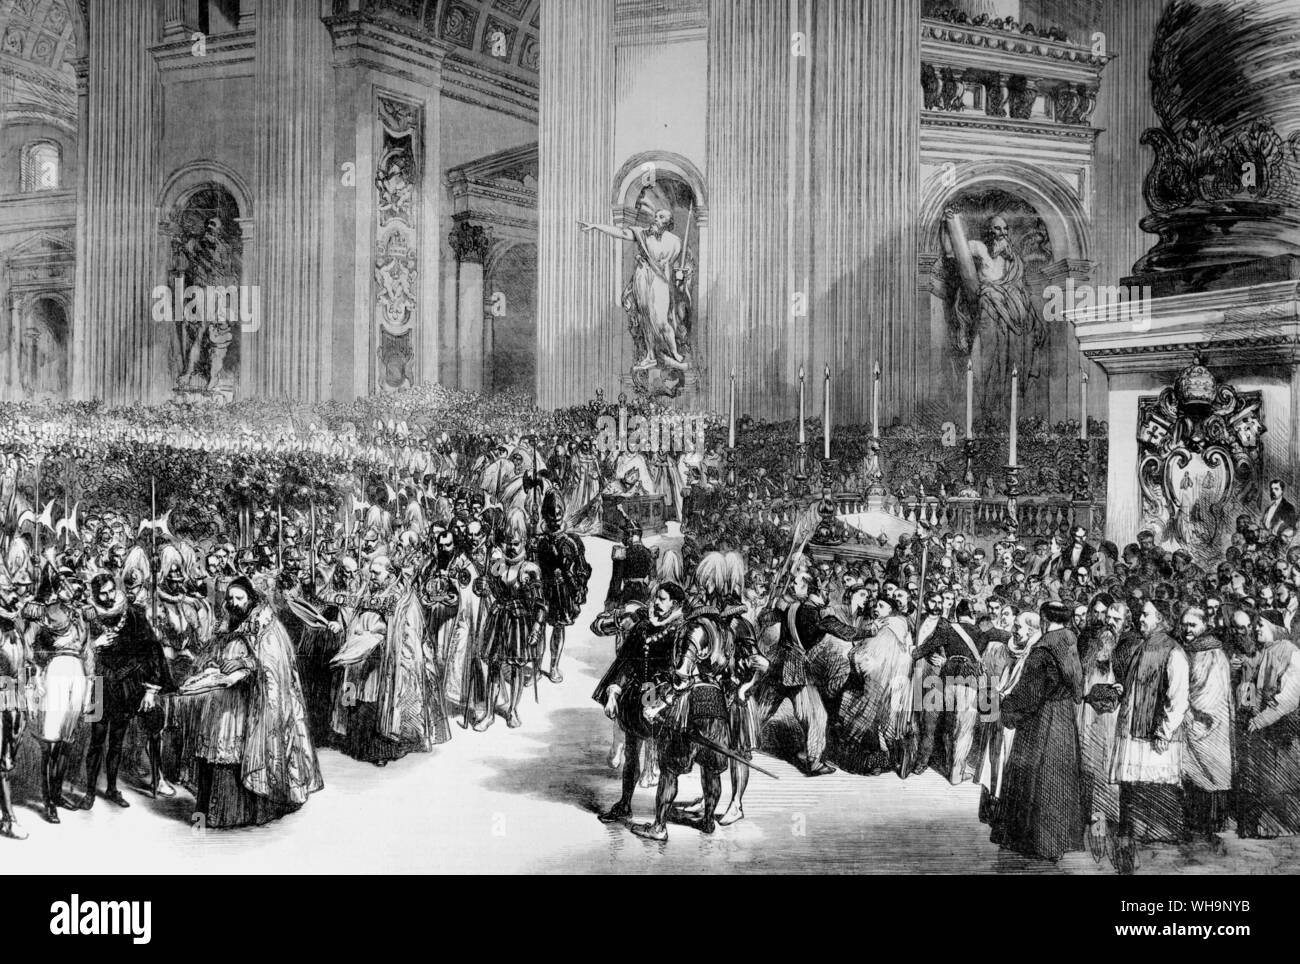 Grand procession of the Ecumenical Council at St. Peter's, Rome, 1869. Stock Photo